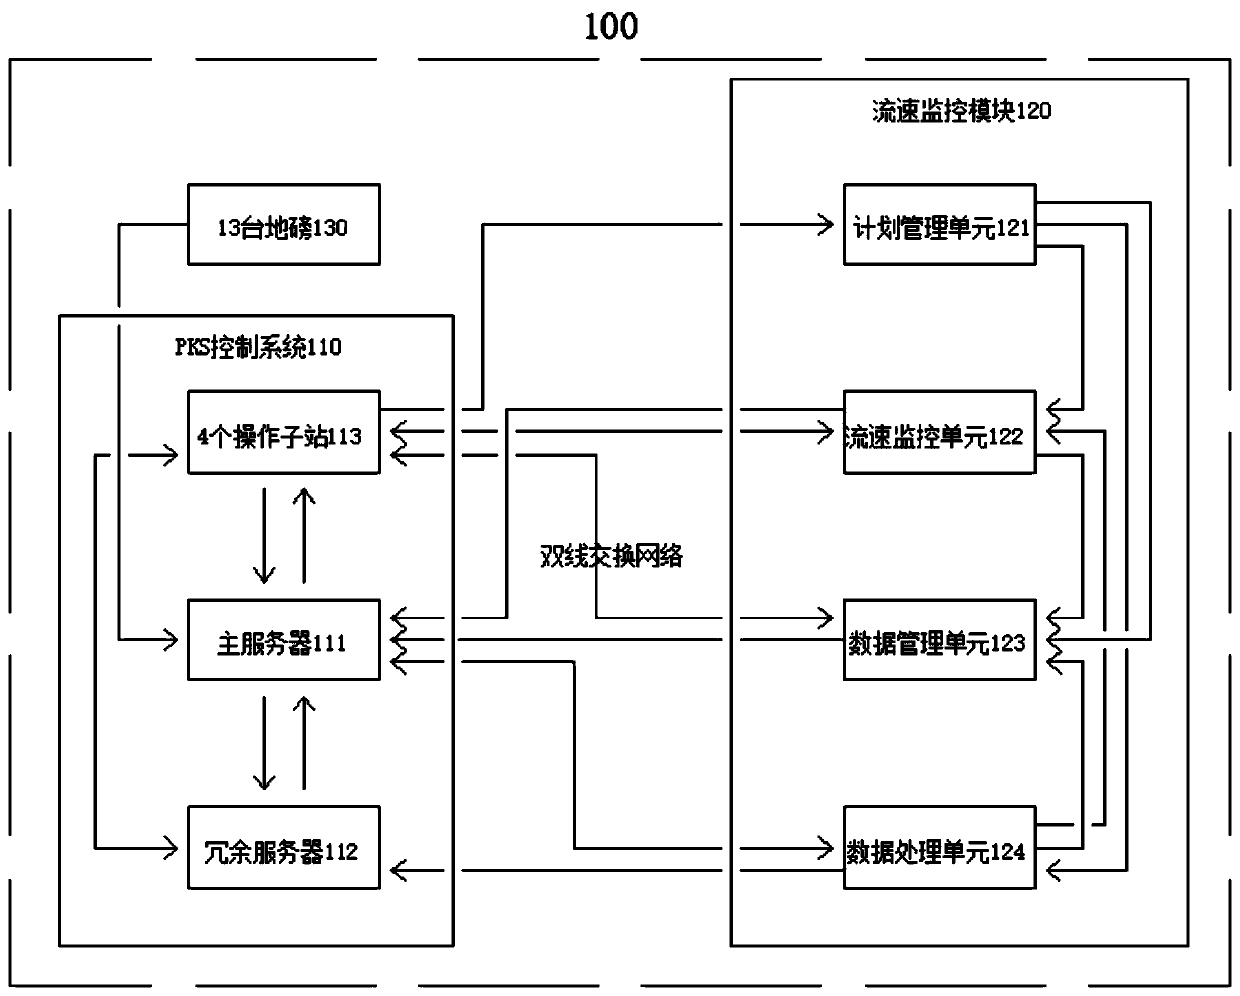 Integrated monitoring system for operation flow rate of tank truck